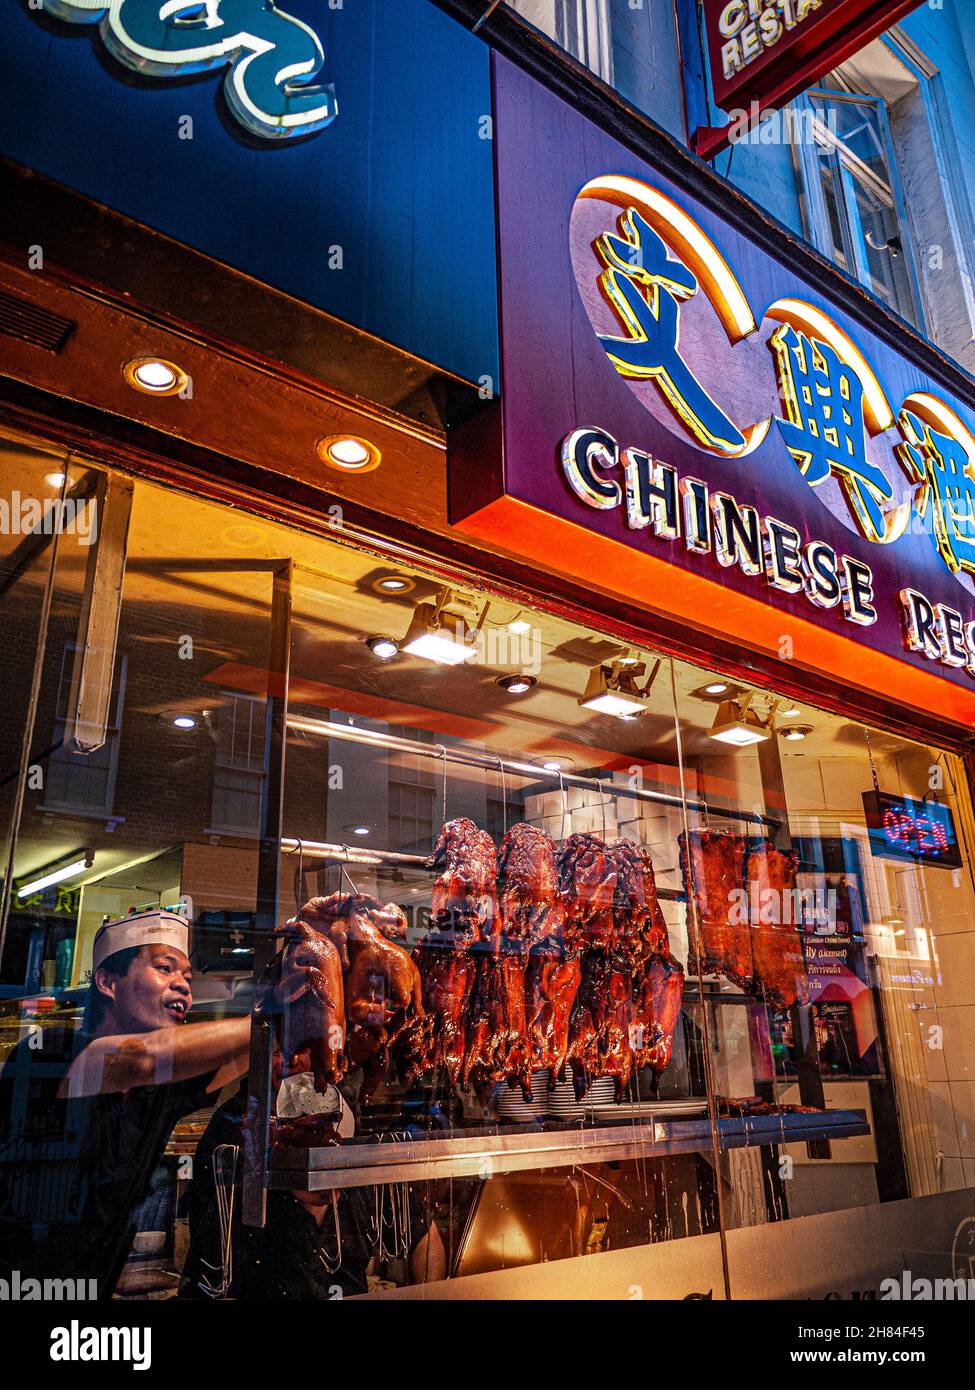 CRISPY DUCK WINDOW DISPLAY CHINATOWN SOHO LONDON Chef arranging rows of enticing Peking crispy duck and pork belly ribs hanging air drying in Chinese restaurant window display at dusk, Gerrard Street Chinatown Soho London Stock Photo